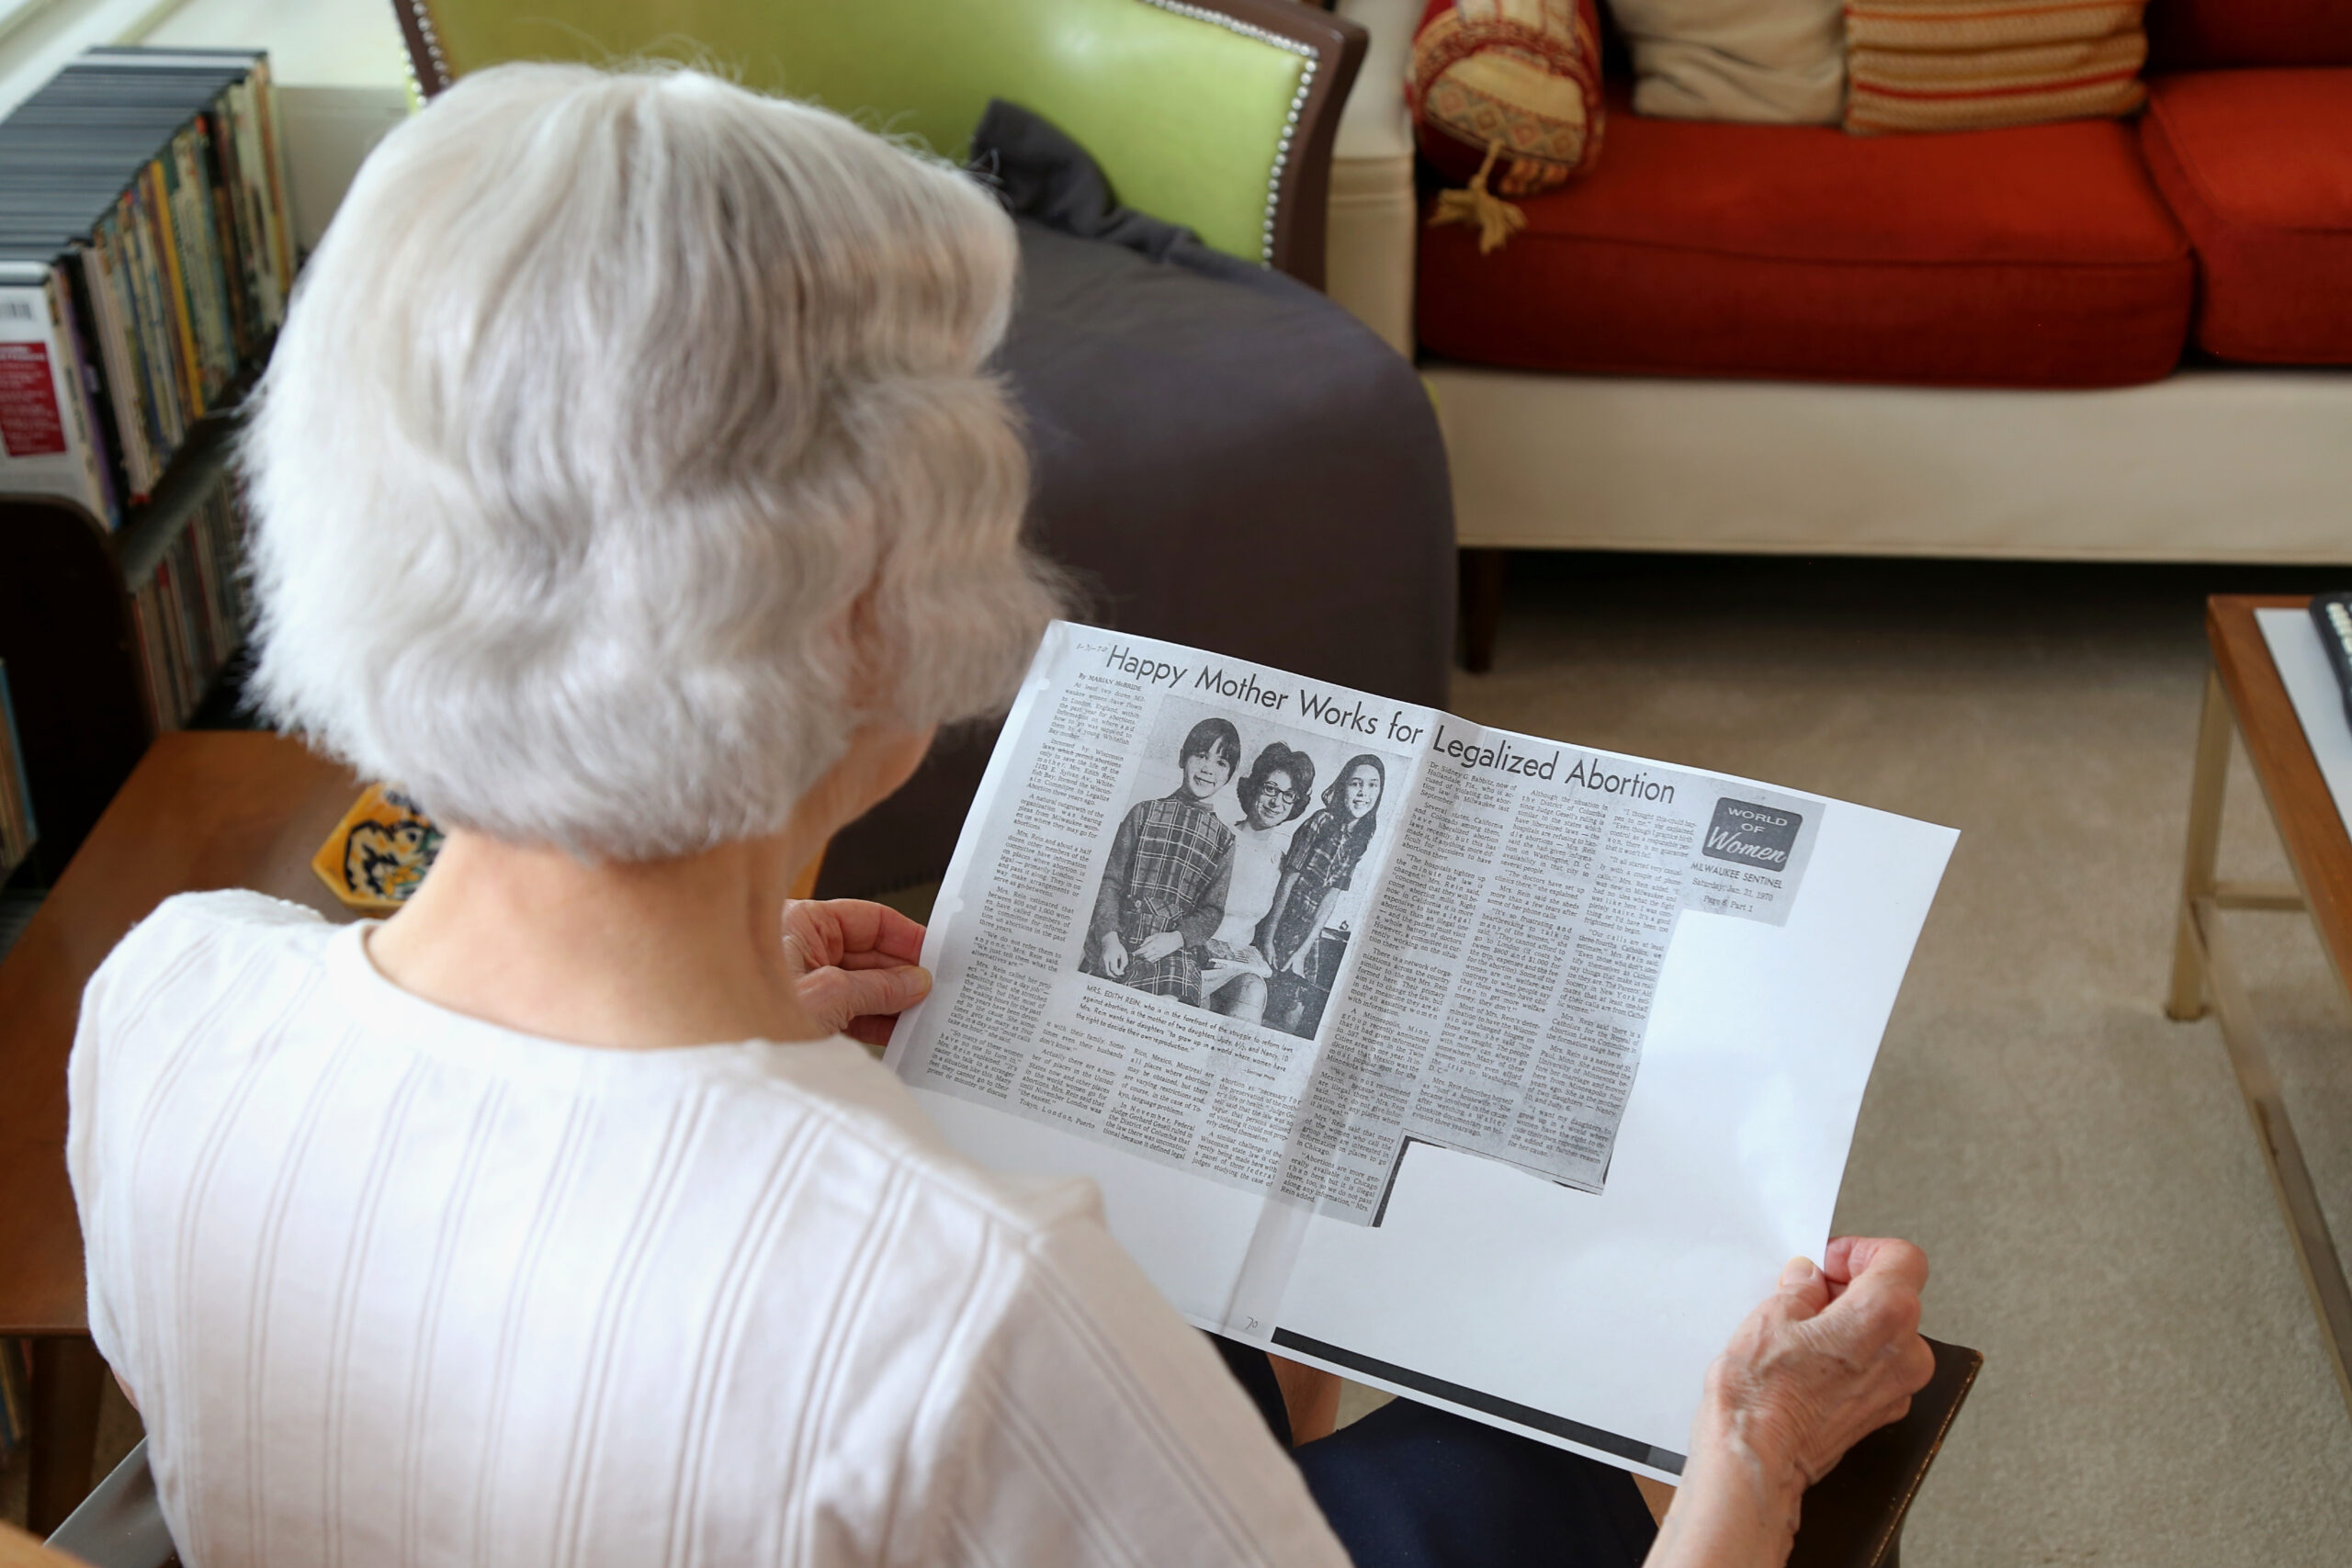 Edie Rein, 89, reads a 1970 newspaper profile from the Milwaukee Sentinel headlined "Happy Mother Works for Legalized Abortion."